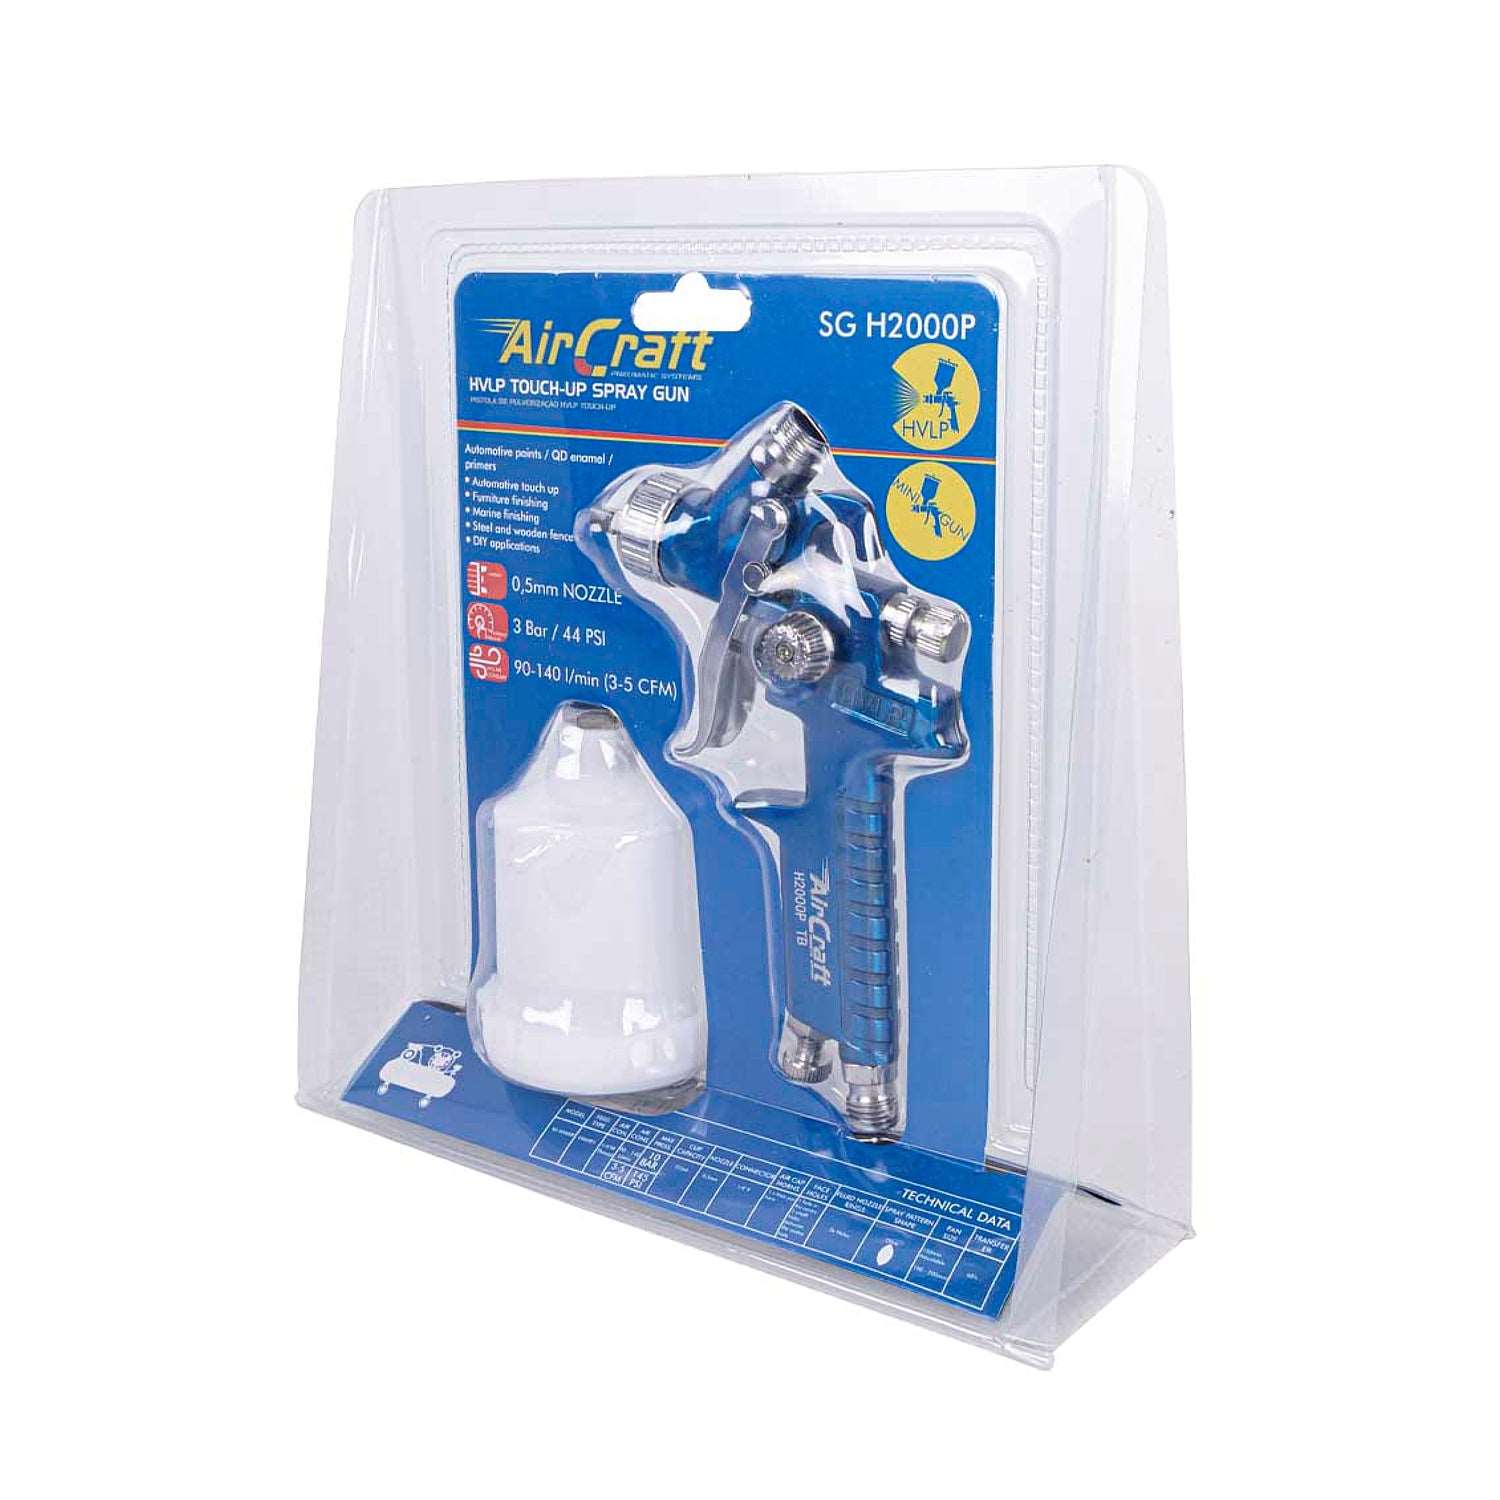 Aircraft Spray Gun Touch Up 0.5mm Nozzle Blister Pack SG H2000P